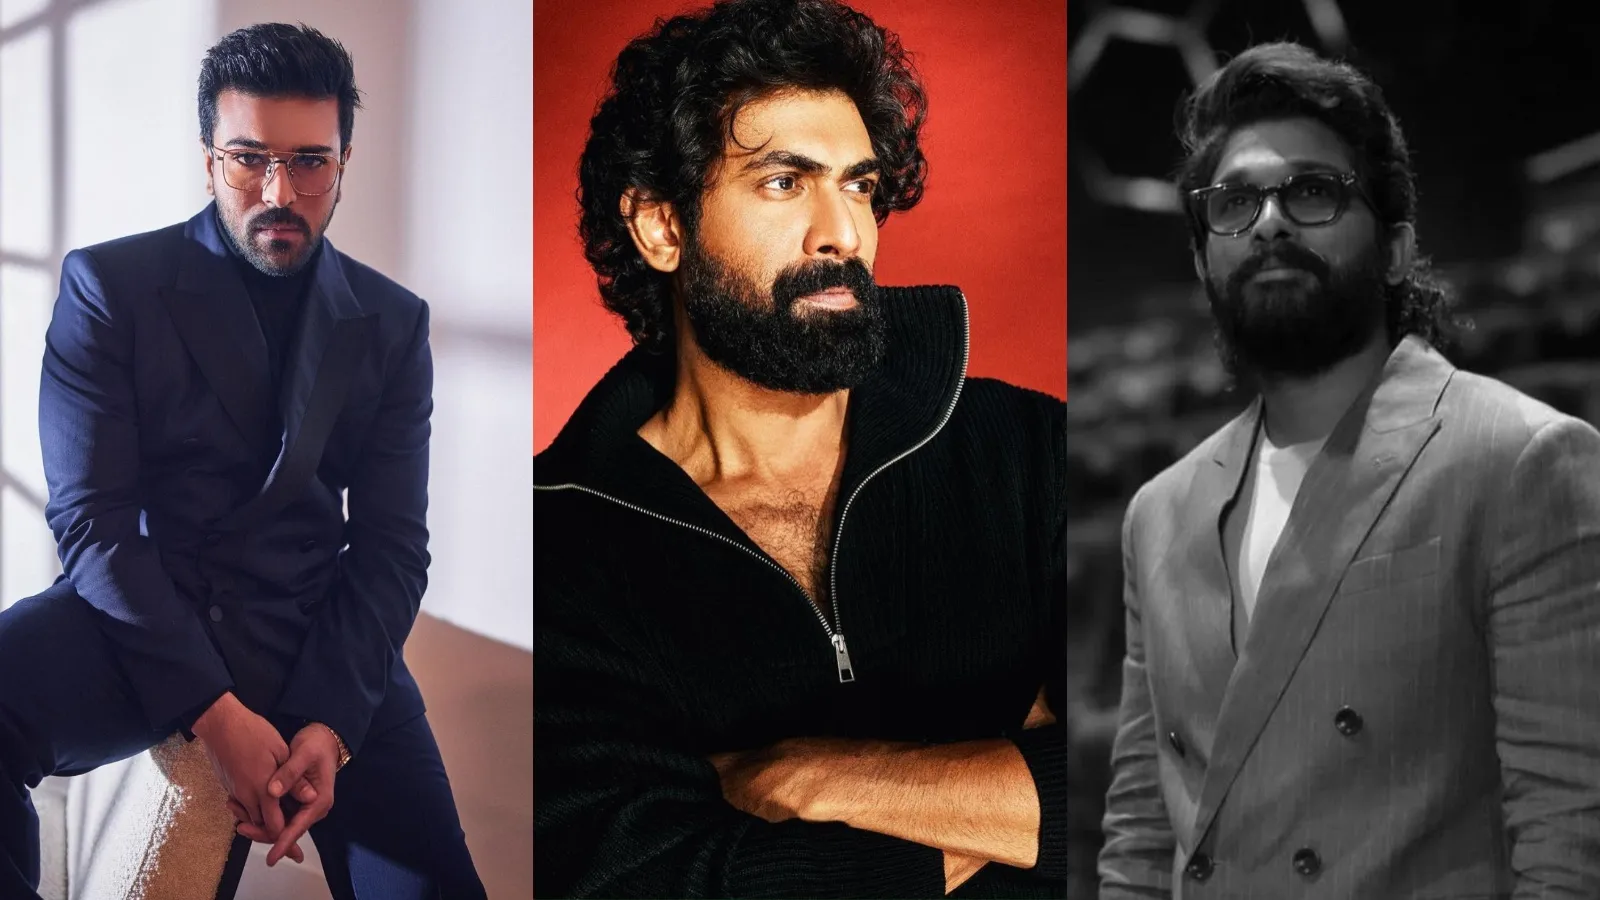 Ram Charan Ka Xxx Video - Rana Daggubati says he, Ram Charan, Allu Arjun give constructive criticism  of each other's films without any ego: 'We're running different races' |  Telugu News - The Indian Express